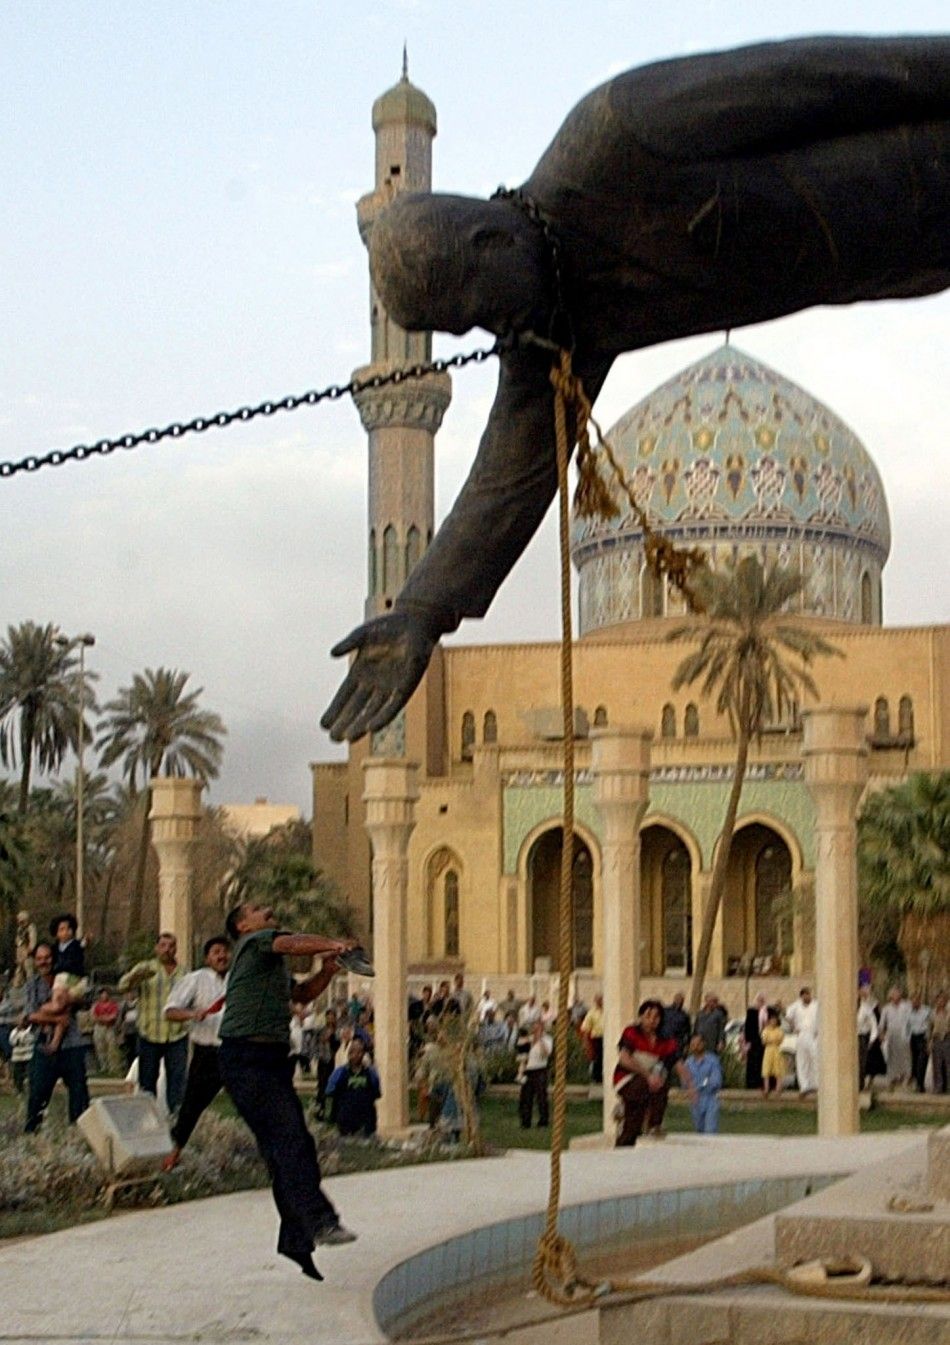 An Iraqi man throws stones at a statue of Iraqs President Saddam Hussein as it falls in central Baghdad April 9, 2003. U.S. troops pulled down a 20-foot six metre high statue of President Saddam Hussein in central Baghdad on Wednesday and Iraqis d